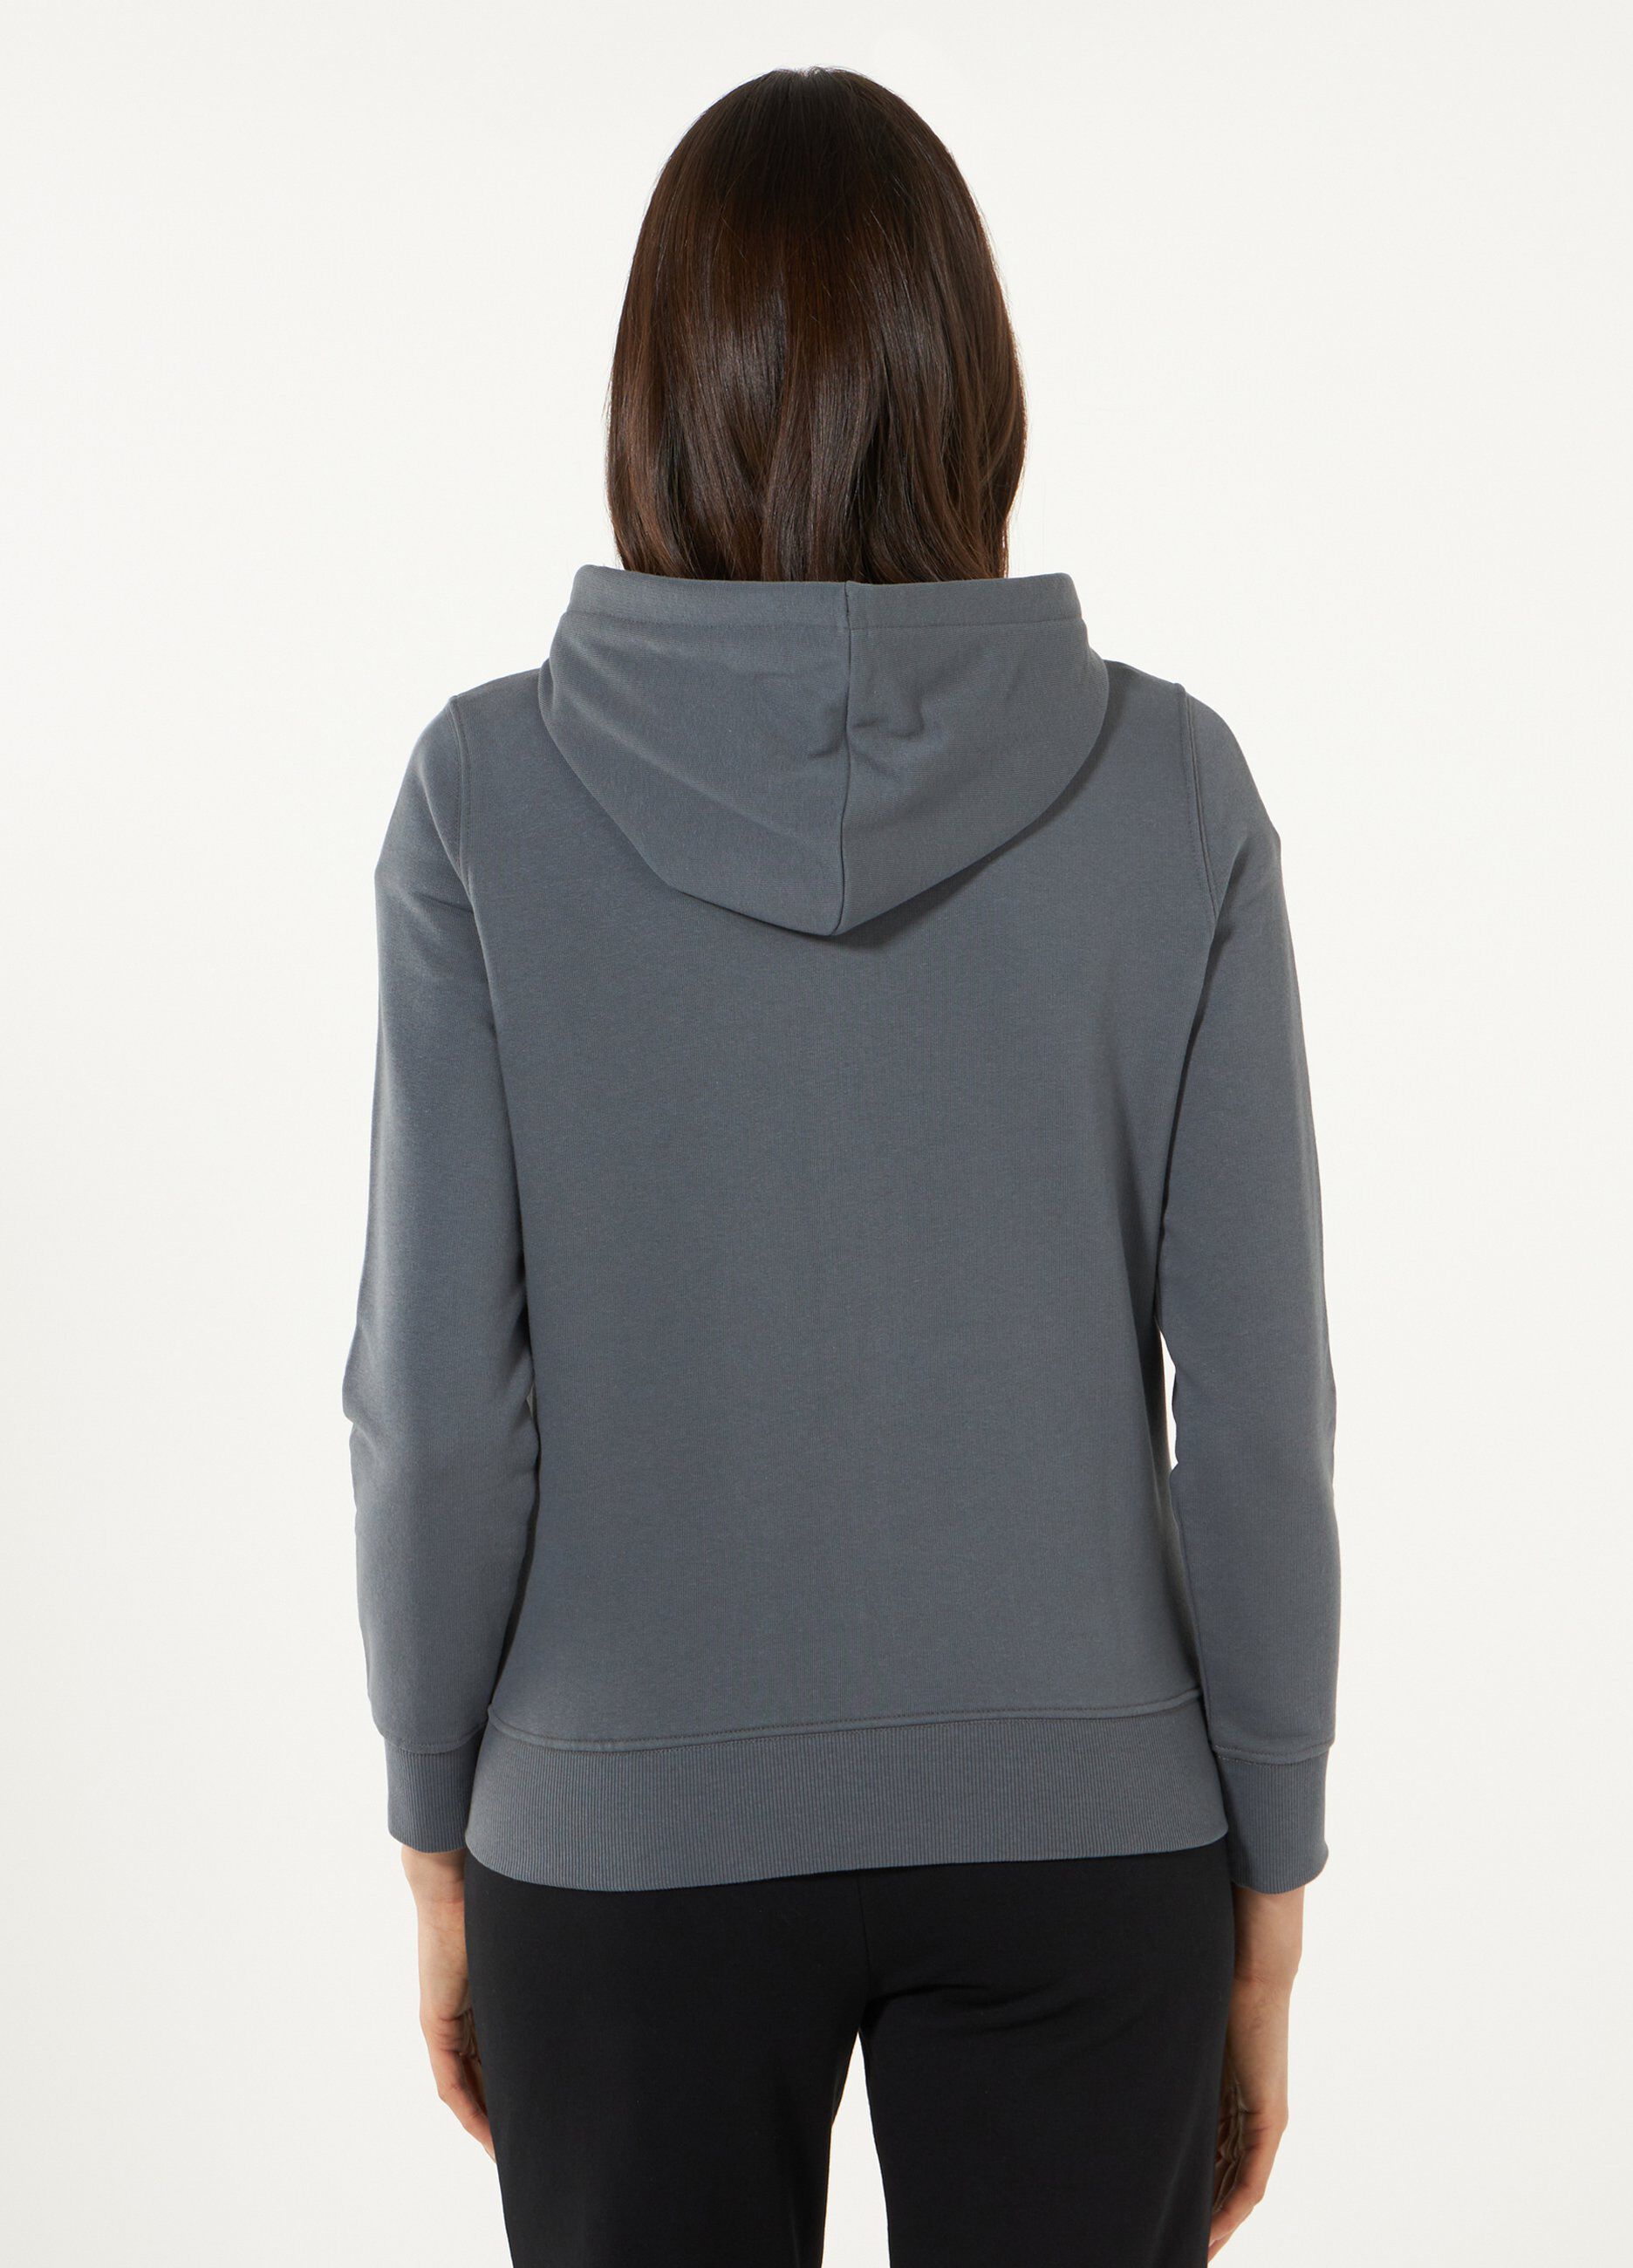 Giacca Holistic fitness full zip donna_1